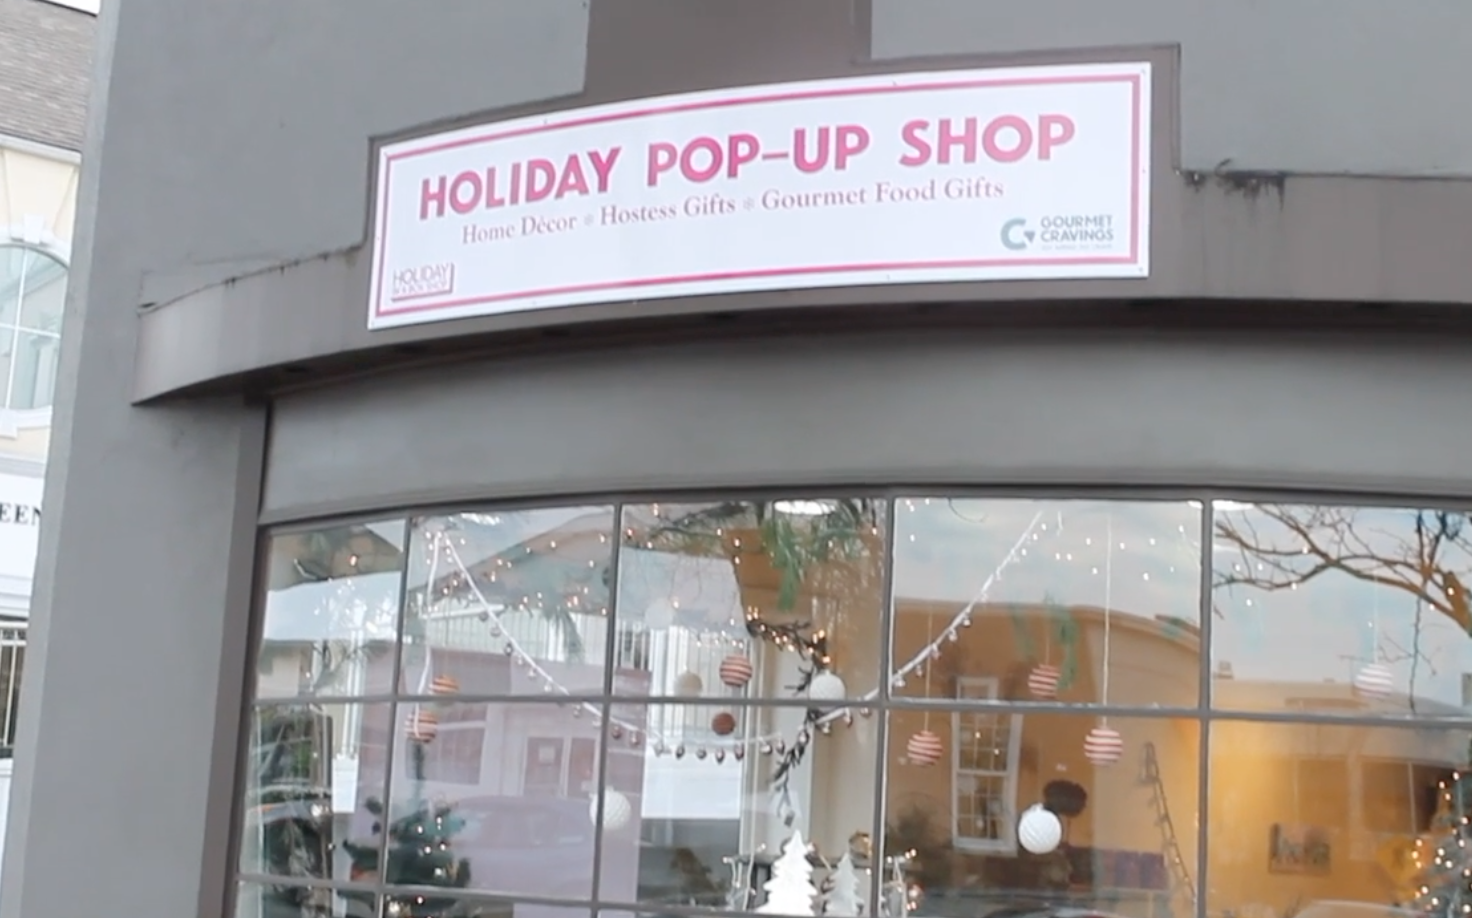 Inside look: holiday pop-up shop